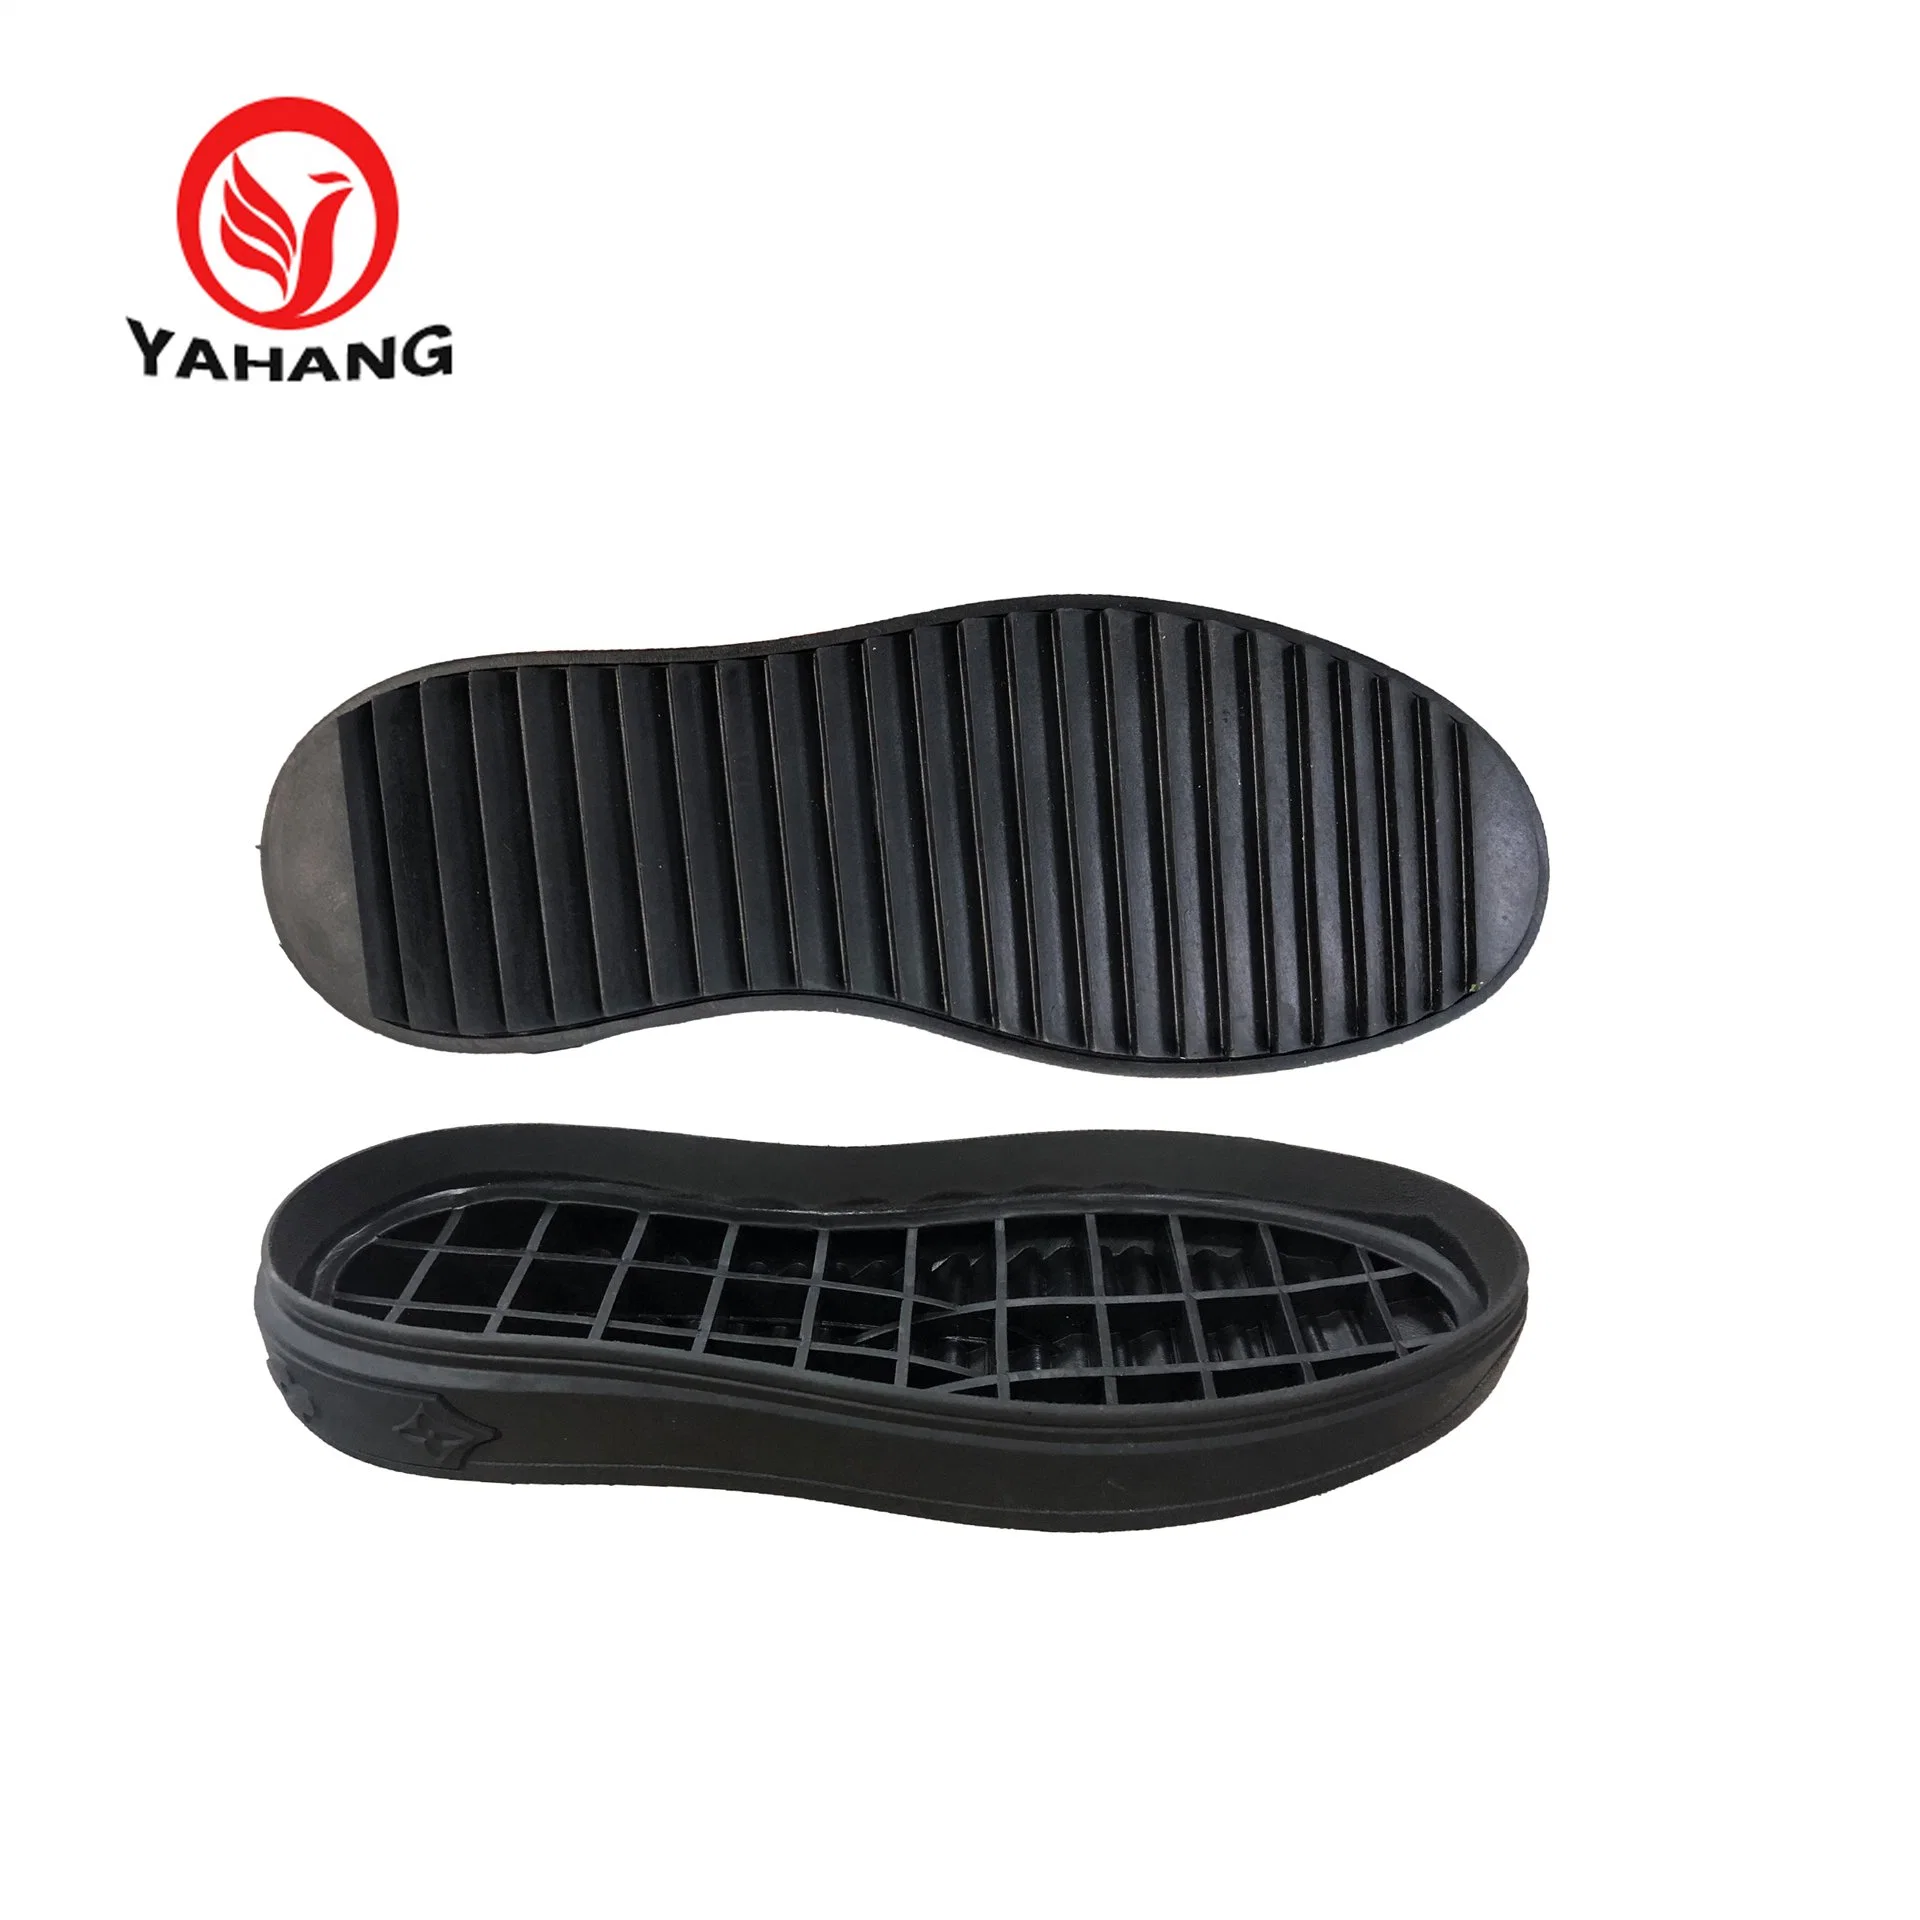 Fashionable Young Lady Dunk Shoes Rubber Sole